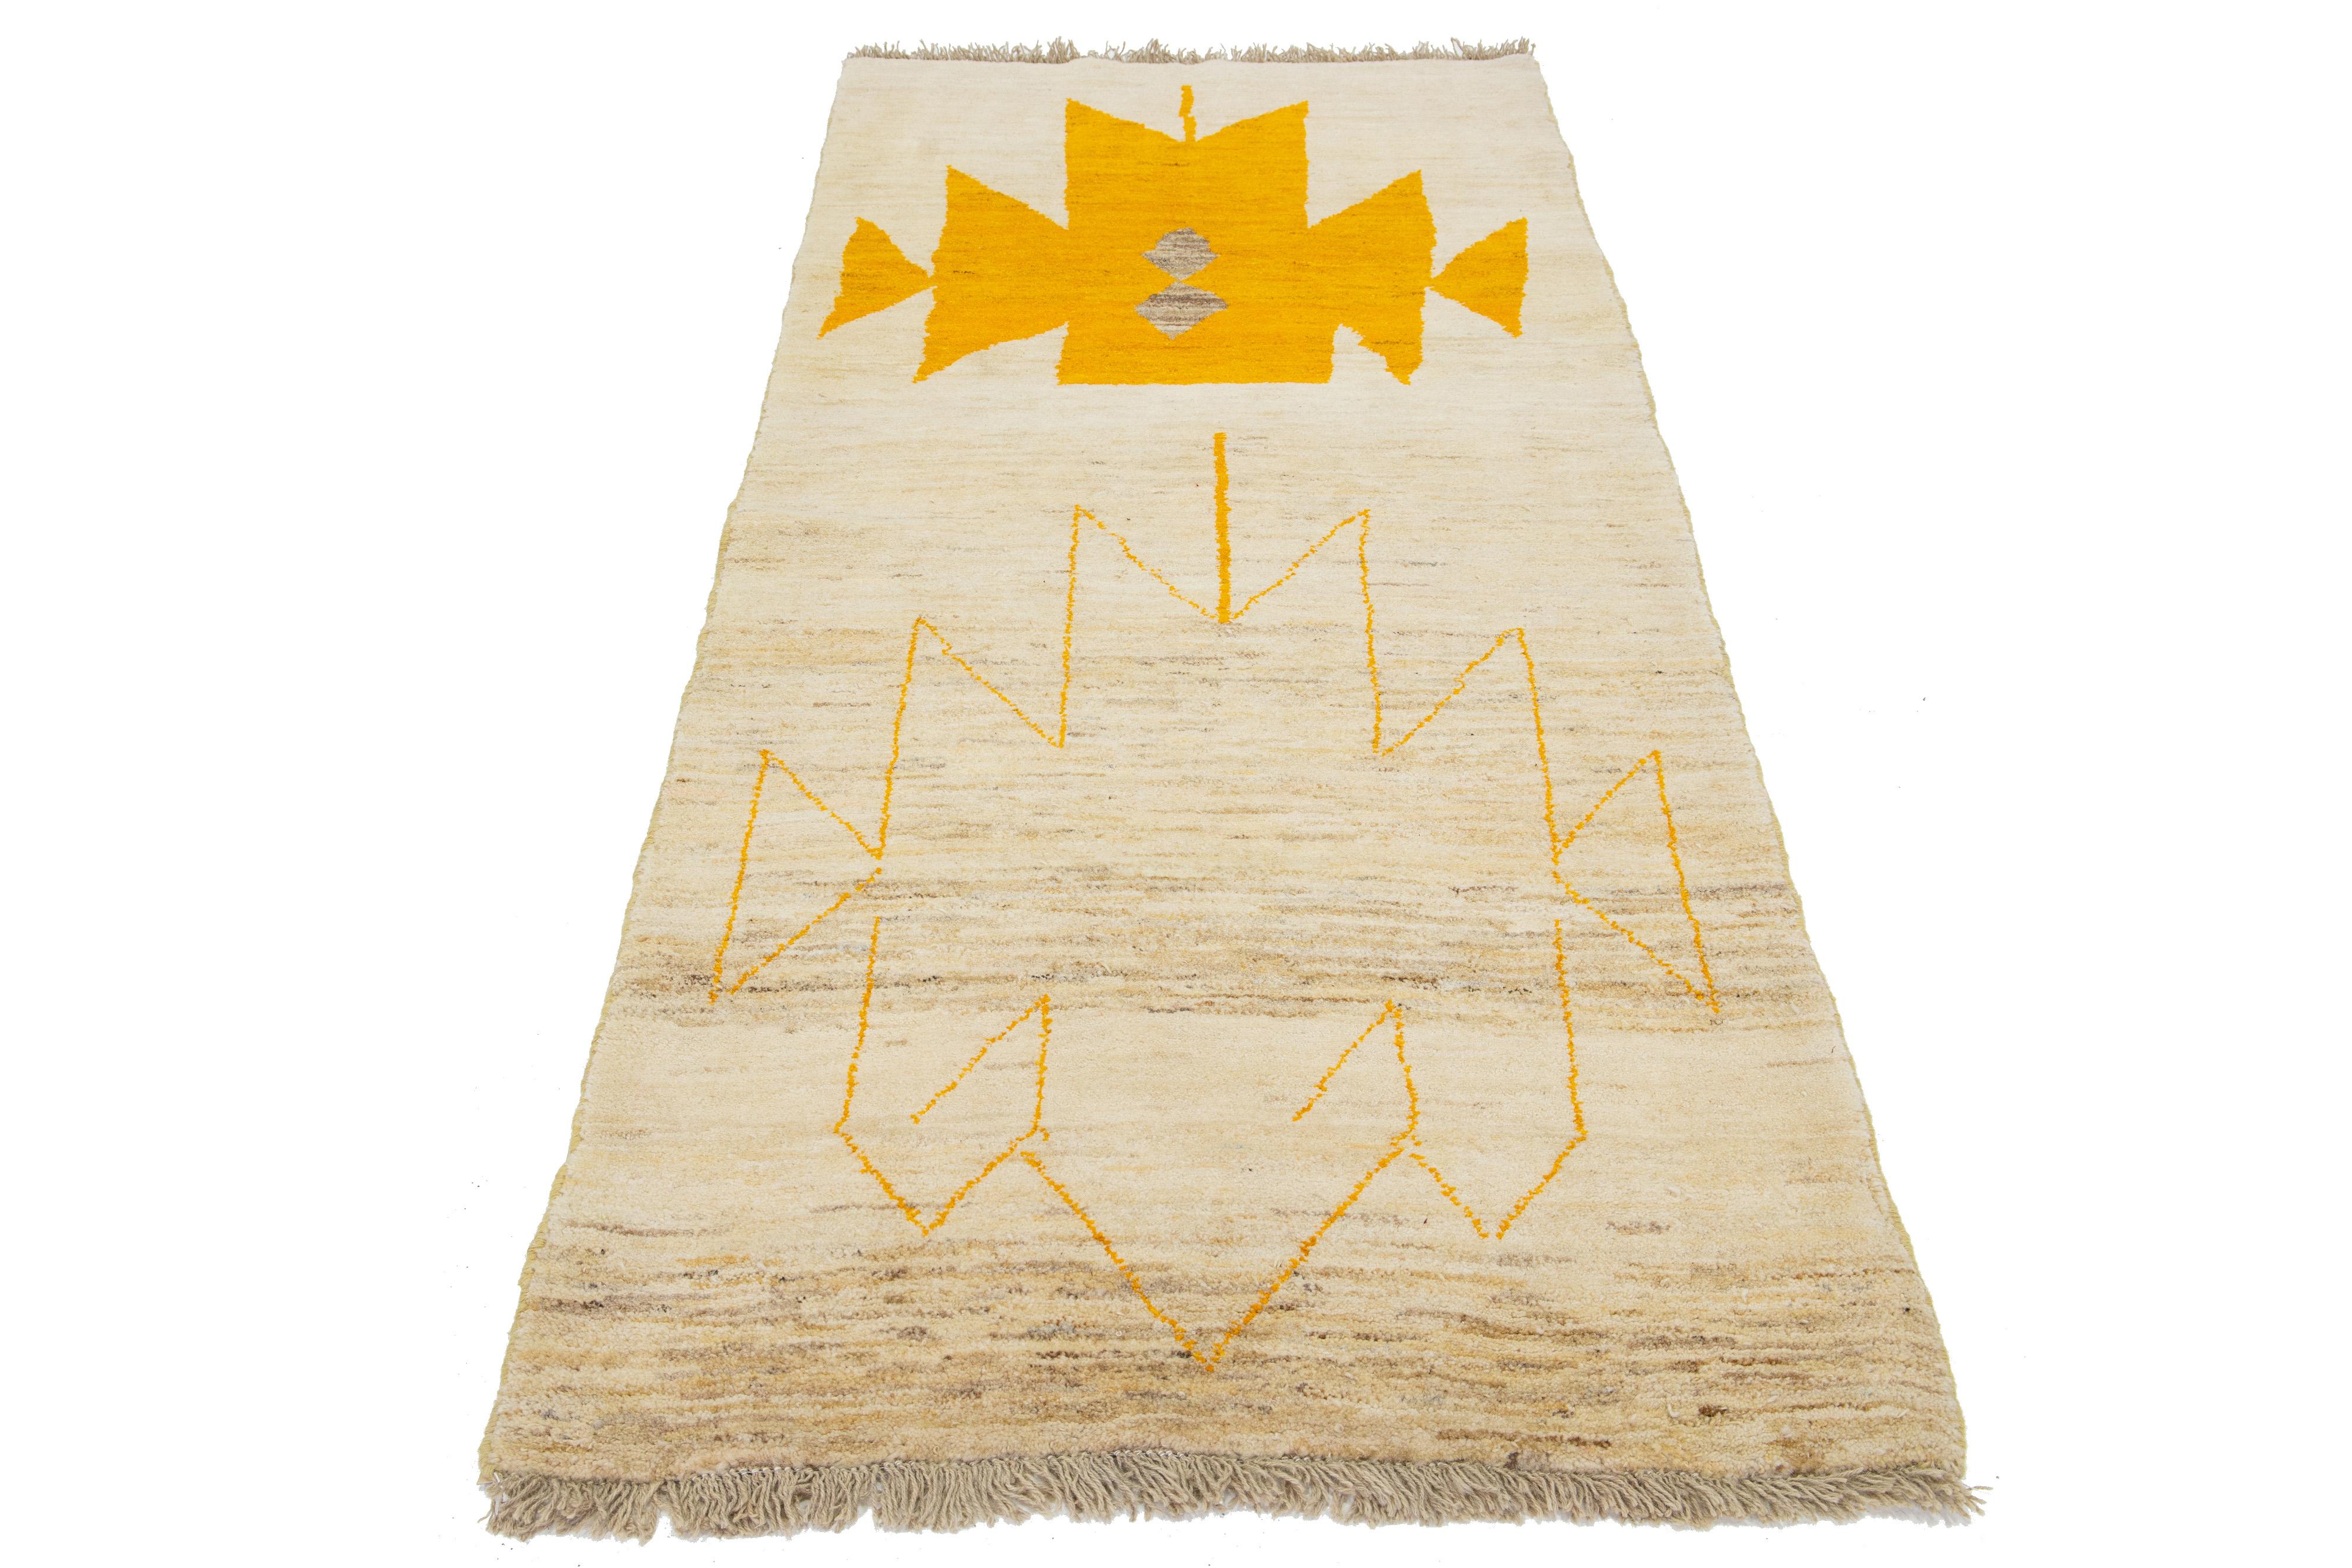 This hand-knotted wool rug features a lovely beige base and a stunning geometric pattern with vibrant orange and gray accents. It's an exquisite addition to any decor.

This rug measures 3'5